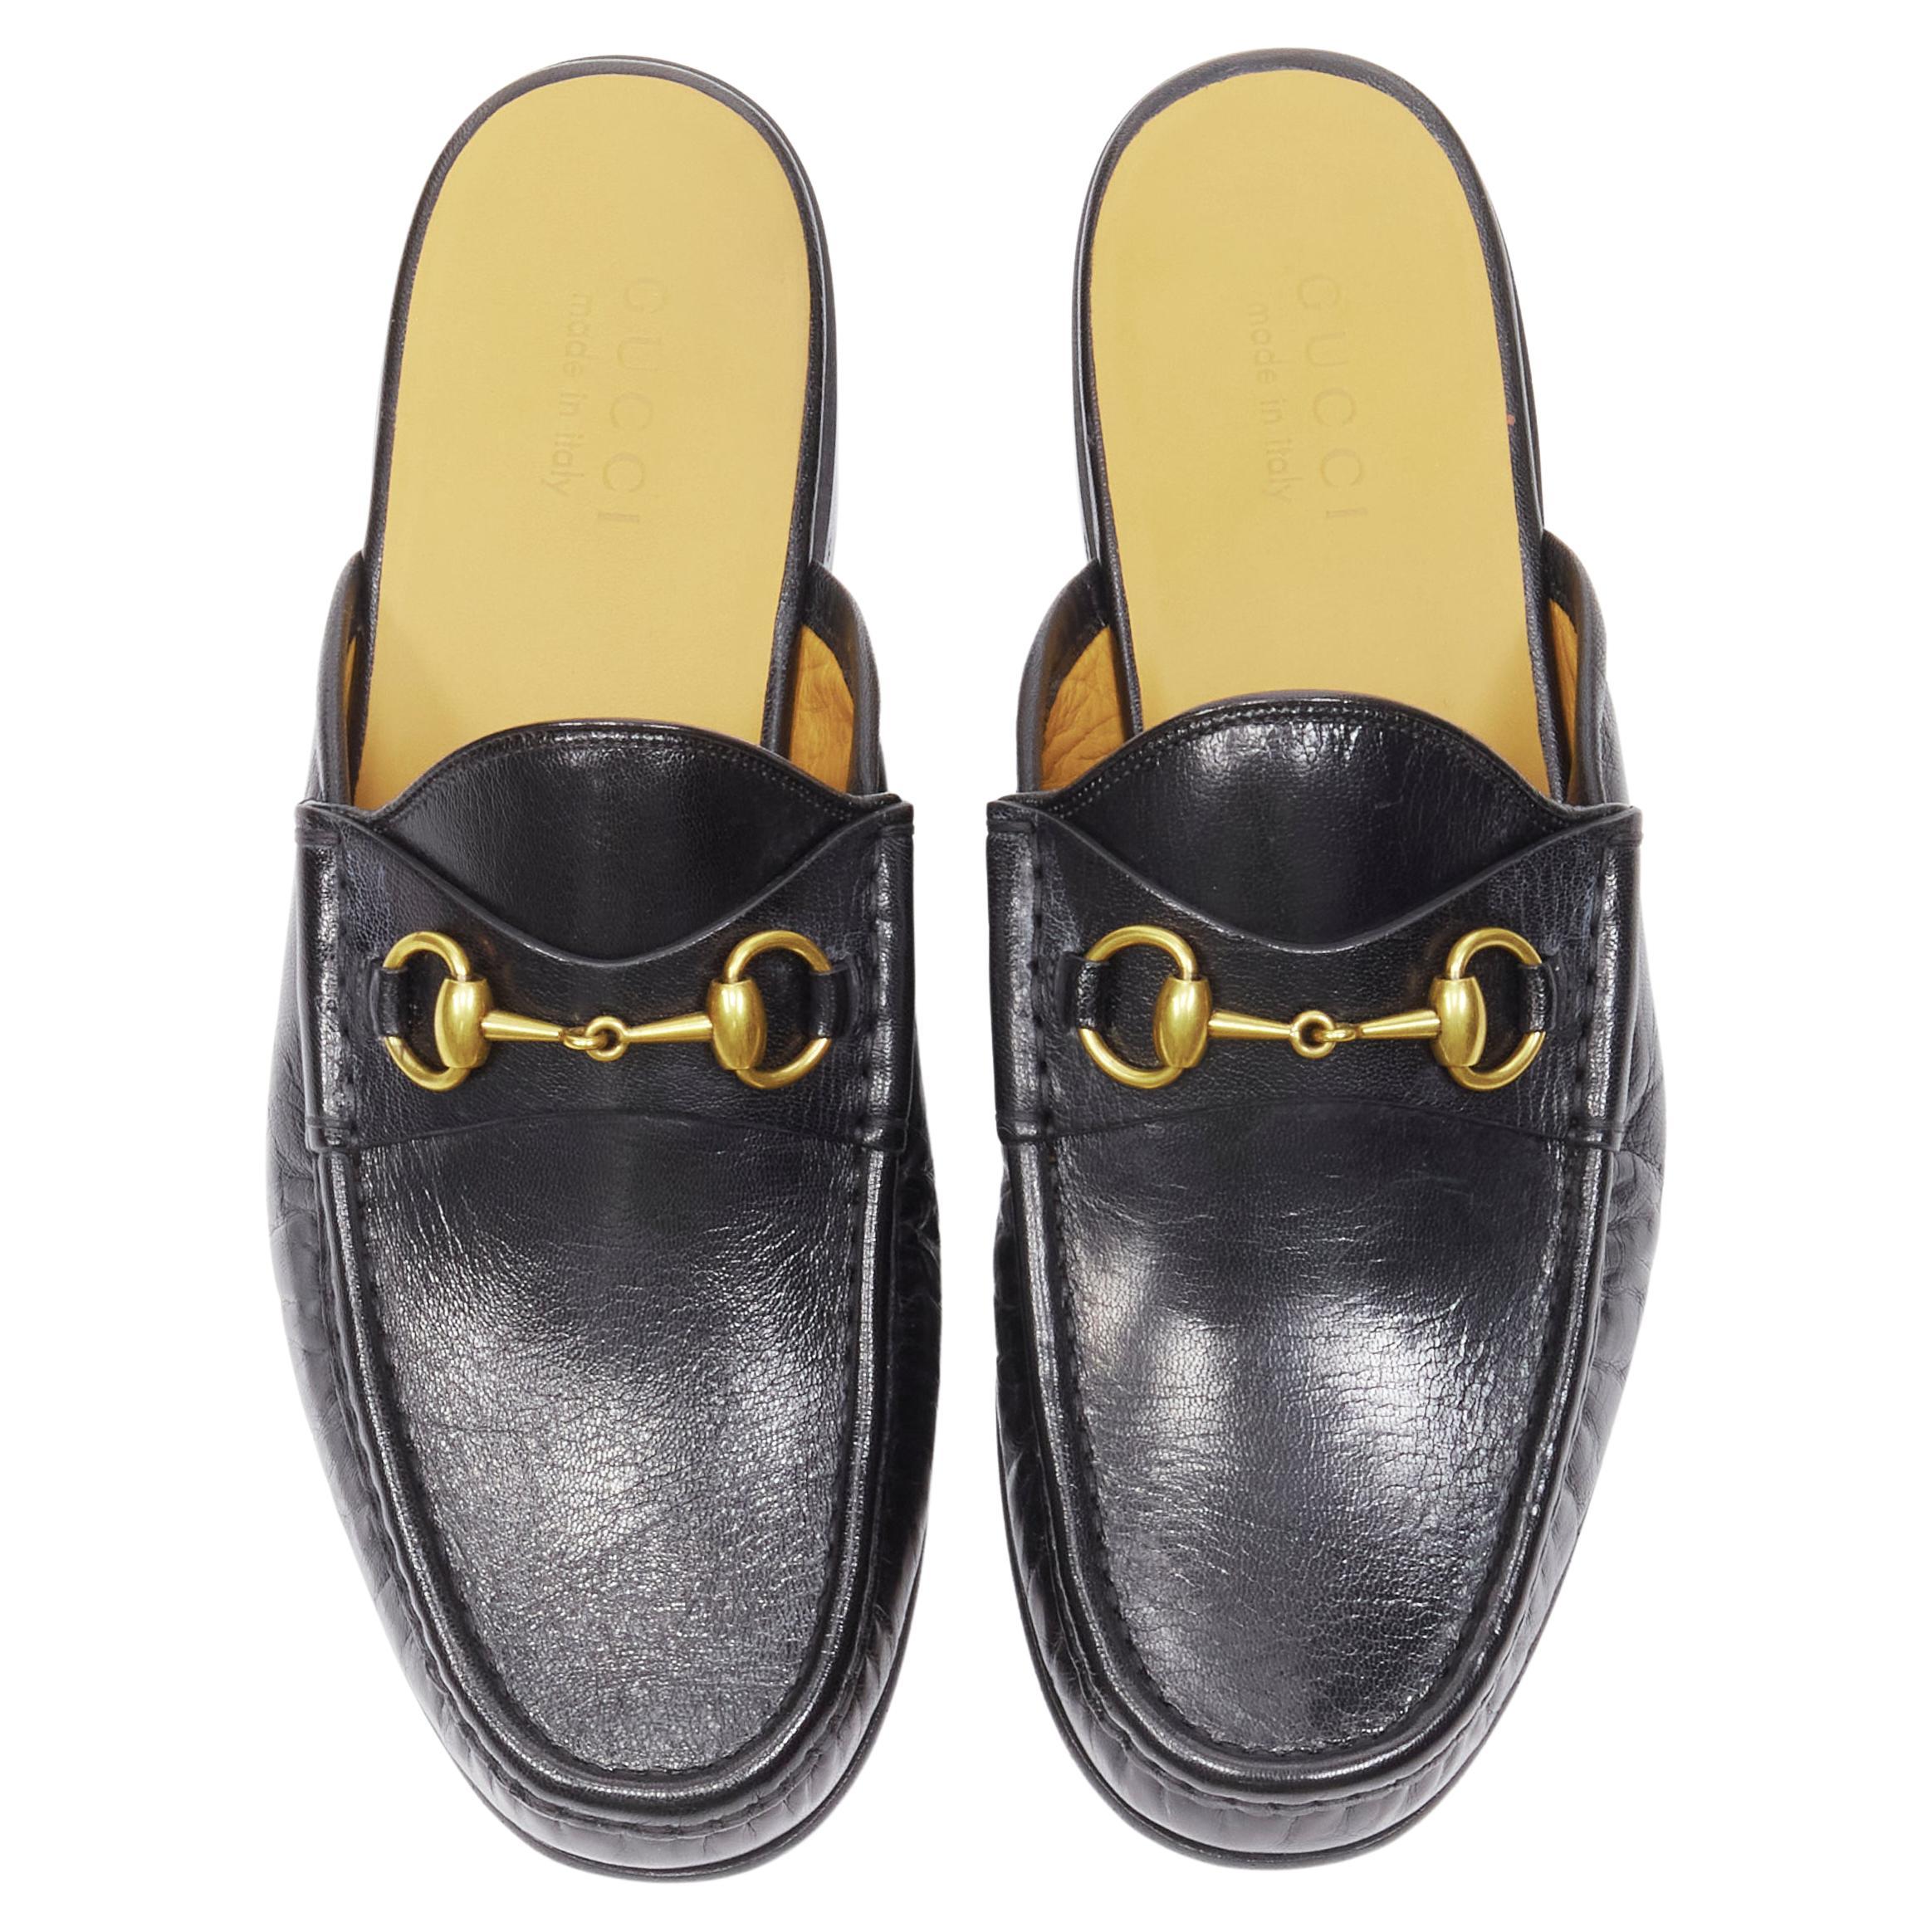 new GUCCI Quentin Nero black leather gold Horsebit slip on loafer UK8.5 US9.5 